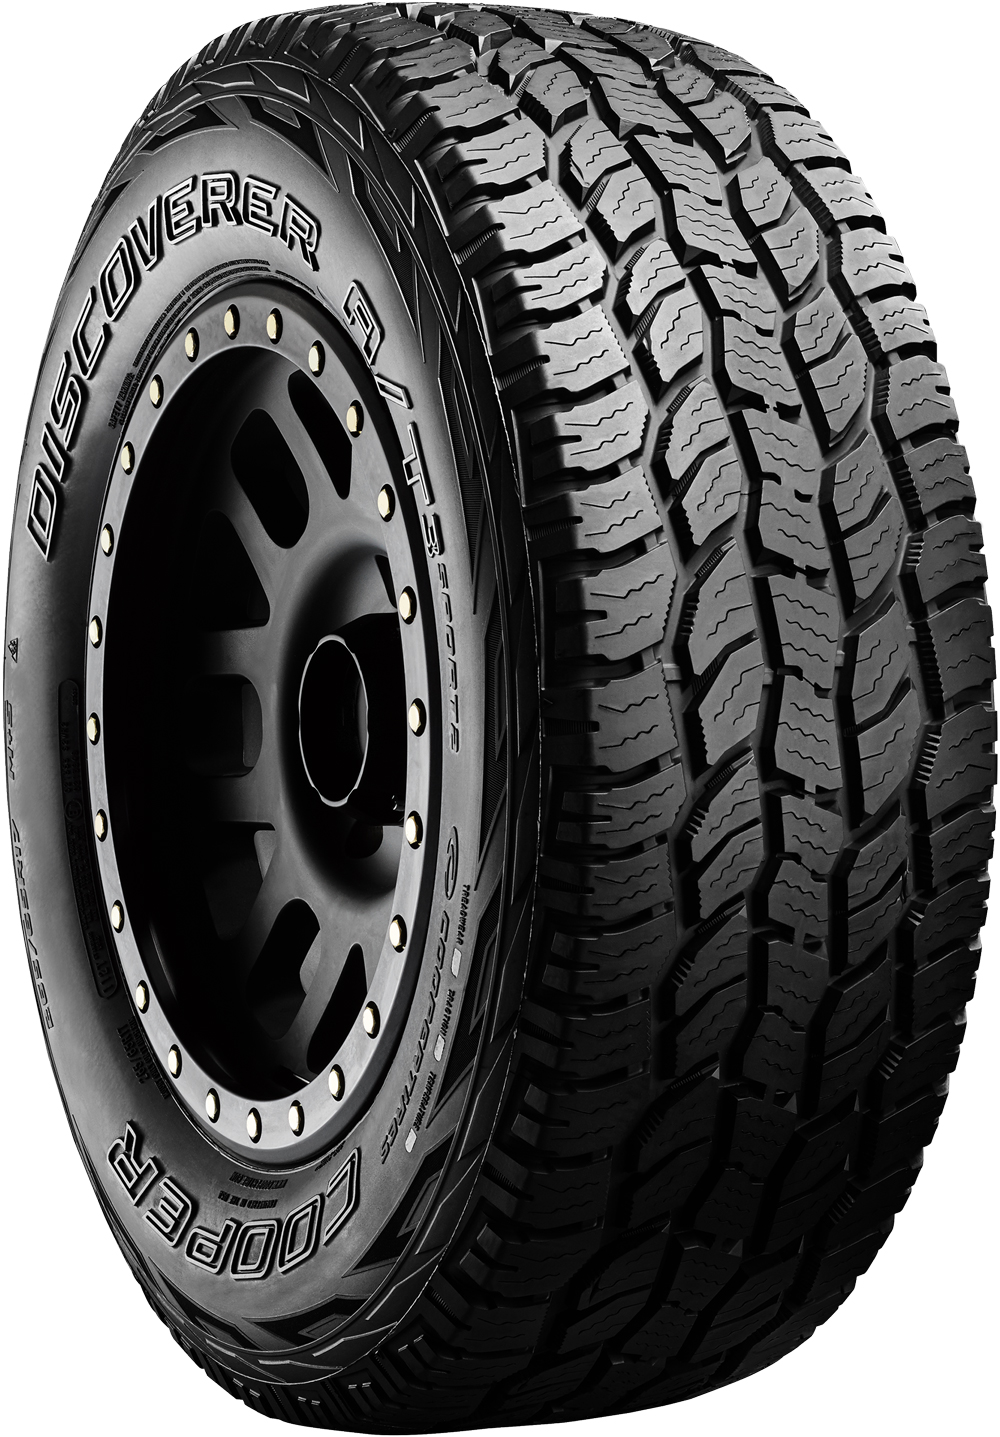 Джипови гуми COOPER DISCOVERER A/T3 SPORT 2 BSW 215/80 R15 102T